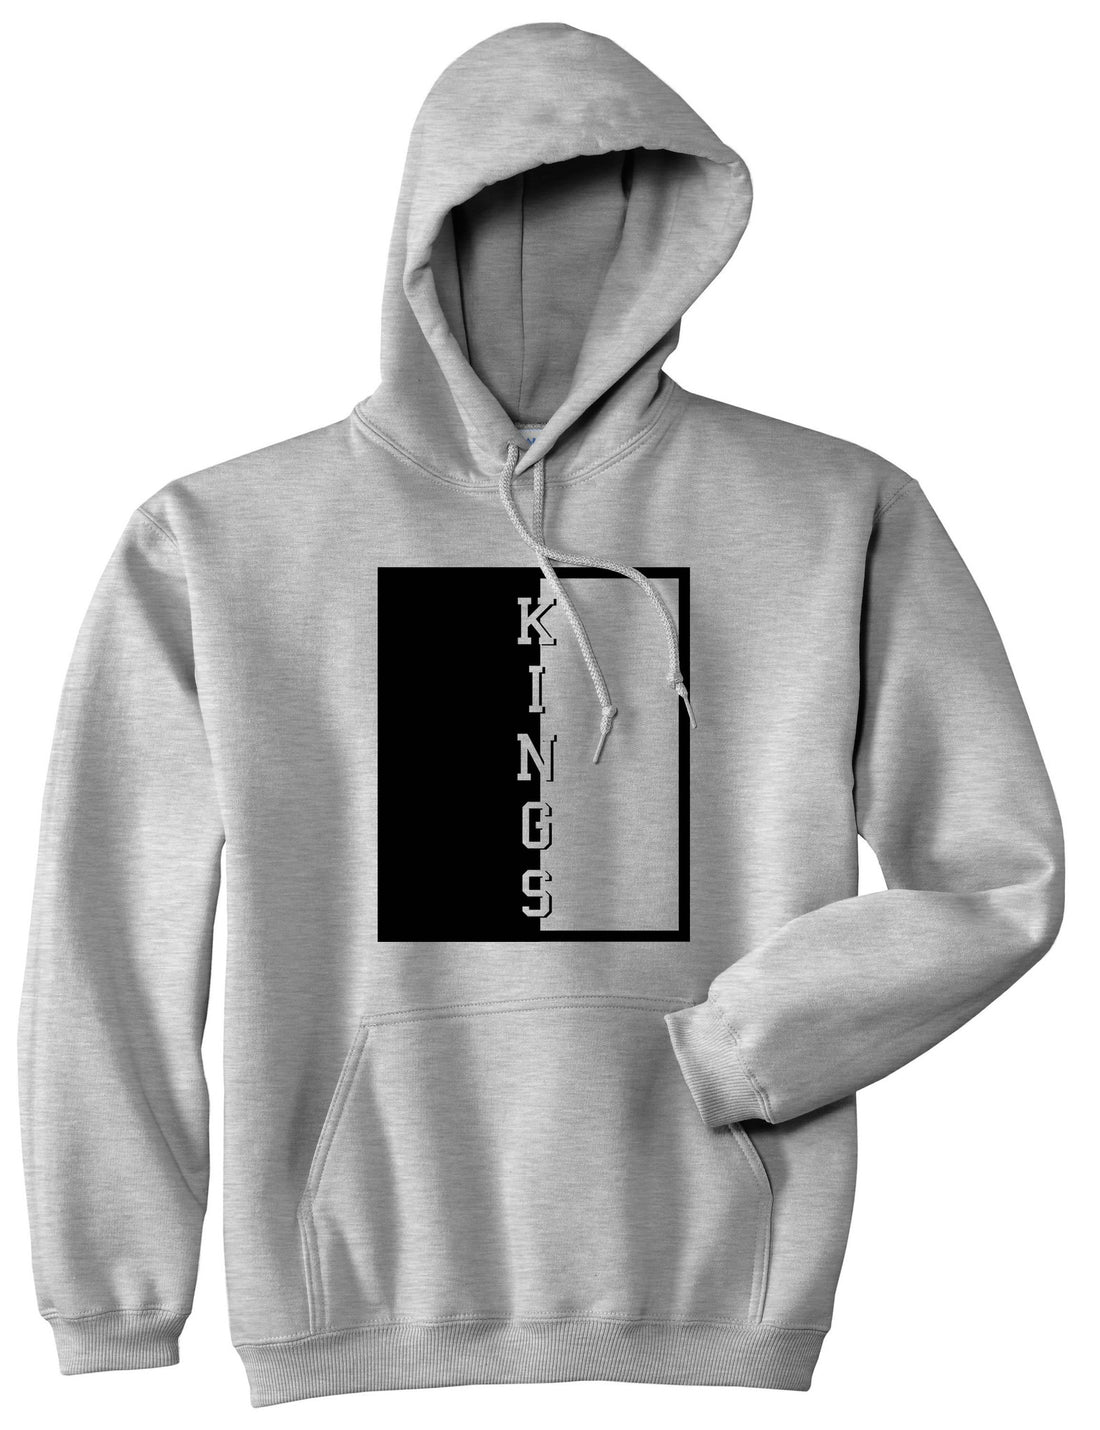 Scarface New York Tony Montana Pullover Hoodie Hoody in Grey by Kings Of NY